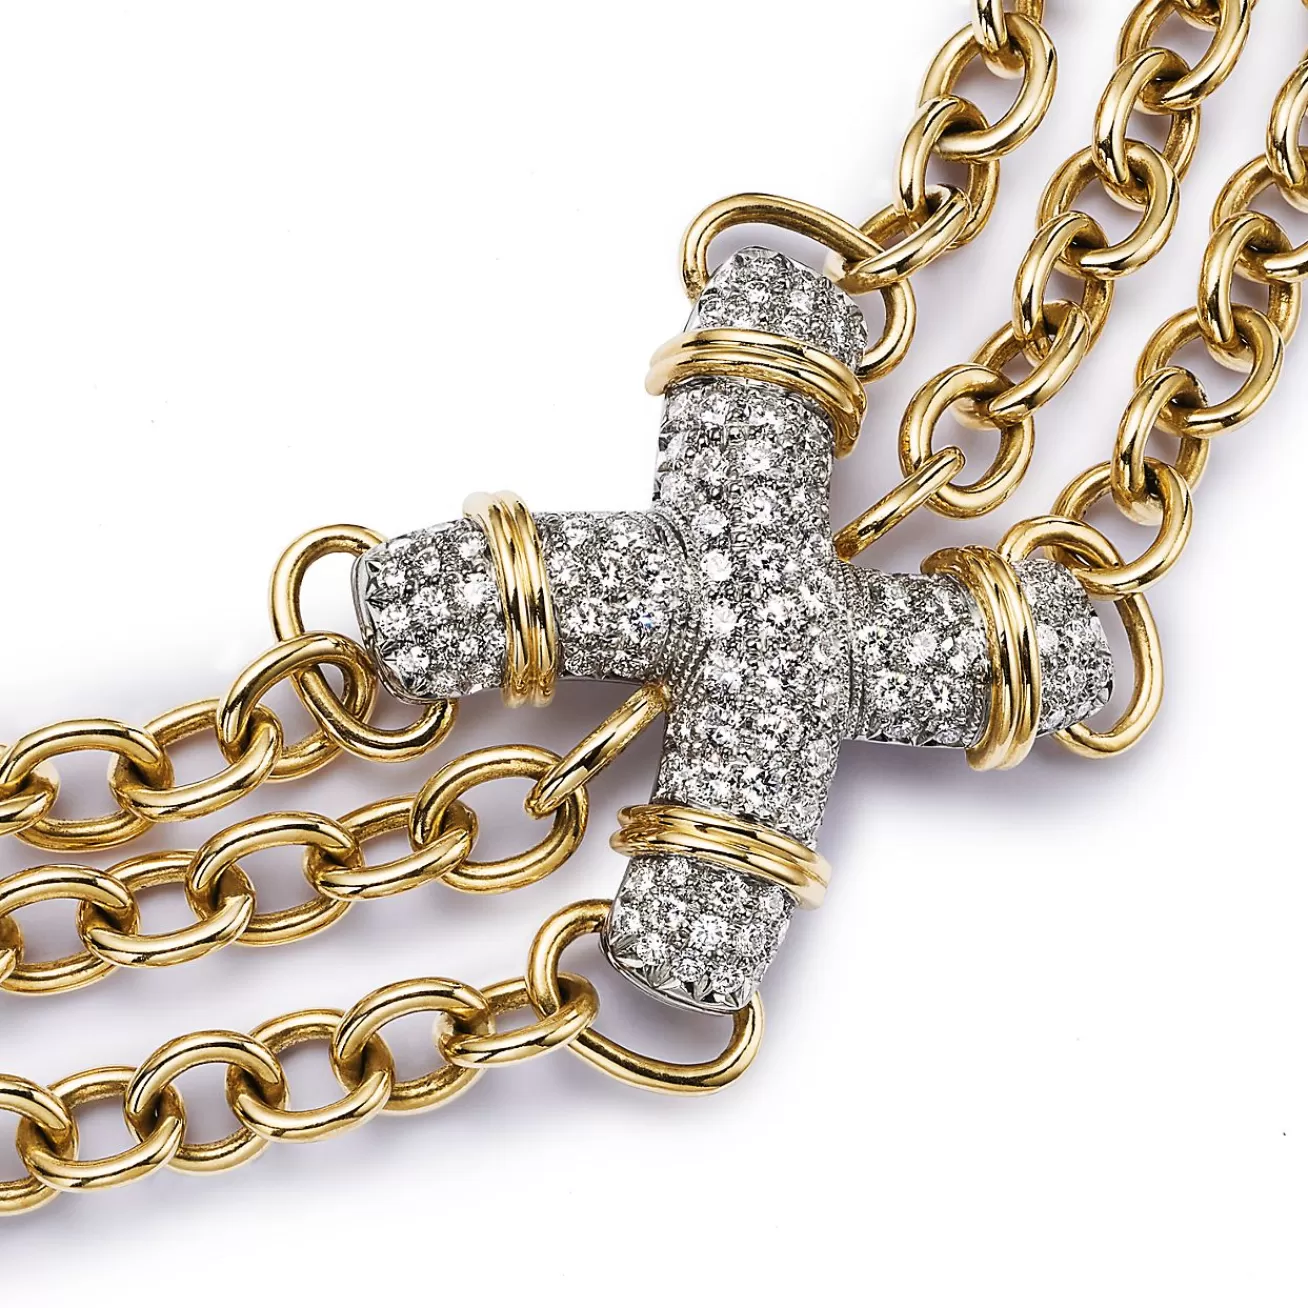 Tiffany & Co. Necklace in Yellow Gold and Platinum with Diamonds | ^ Necklaces & Pendants | Gold Jewelry